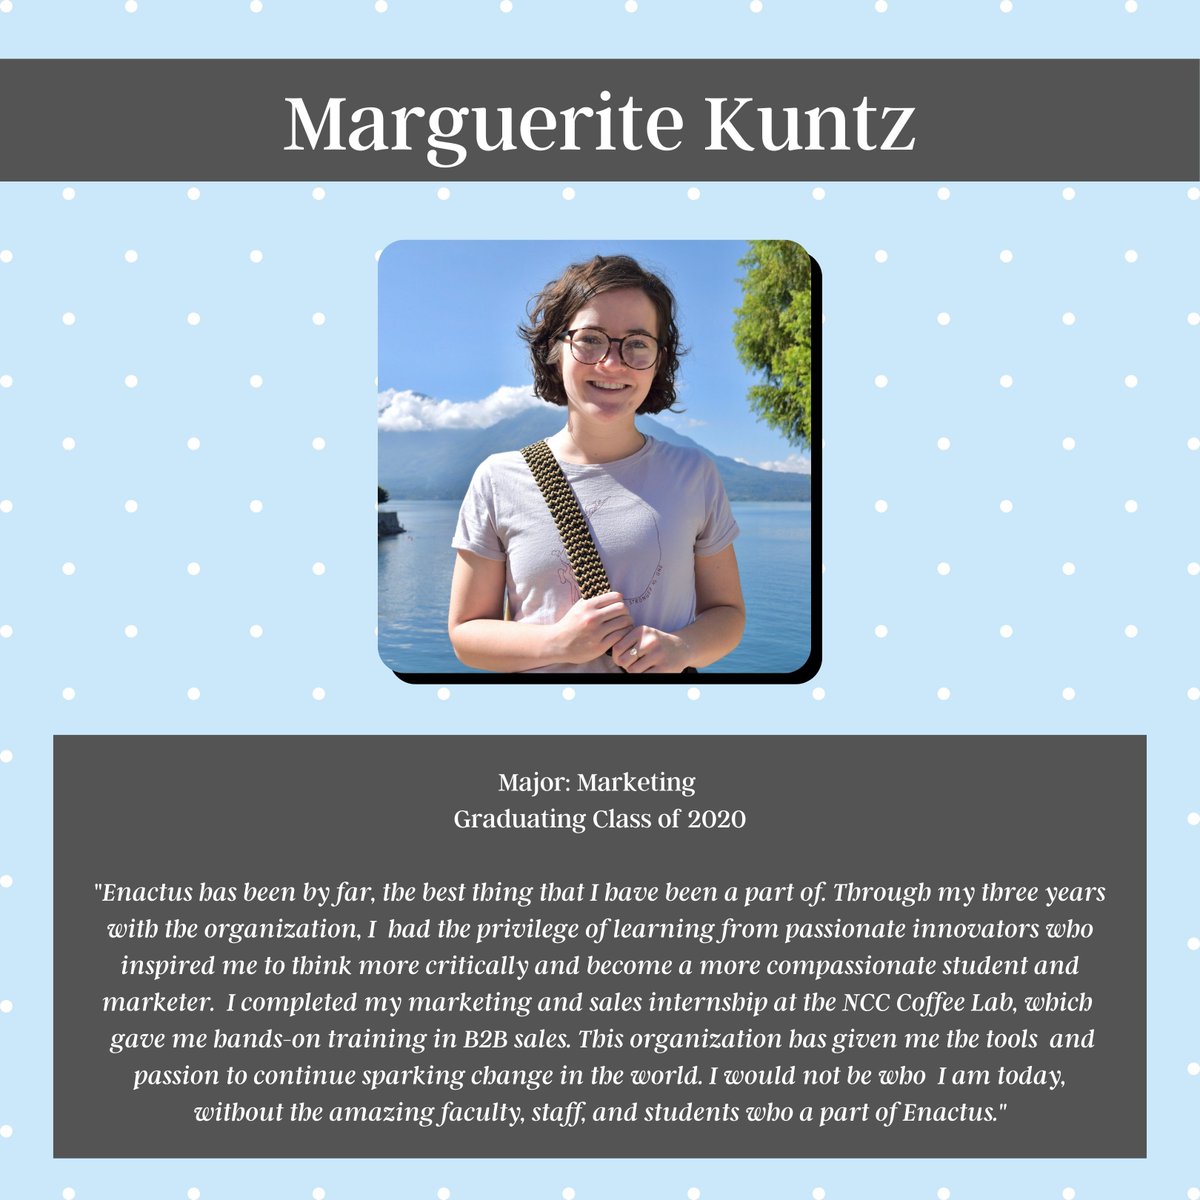 This week's alum is @MargueriteKuntz Fun fact: last year, she helped develop our branding and marketing for Conscious Bean Coffee. Currently, she’s an Operations Assistant at Guaranteed Rate!